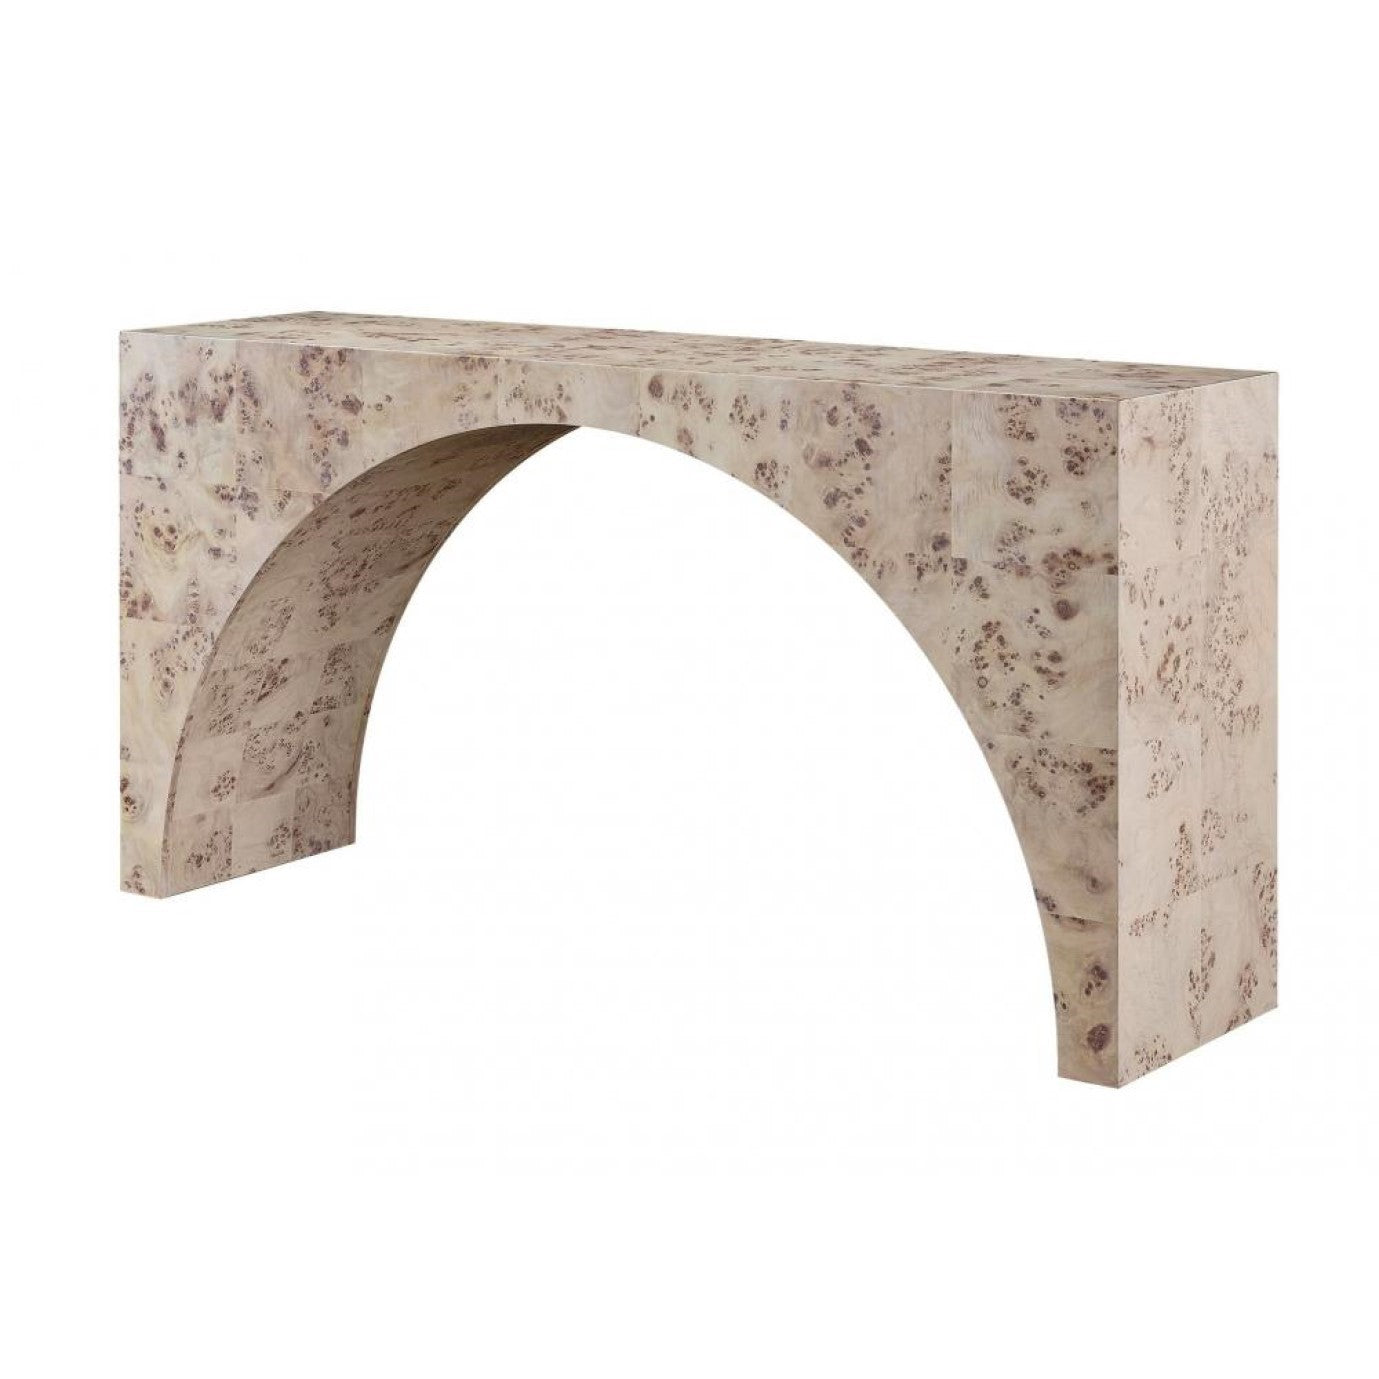 Arched Mappa Burl Wood Console Table 60 inch